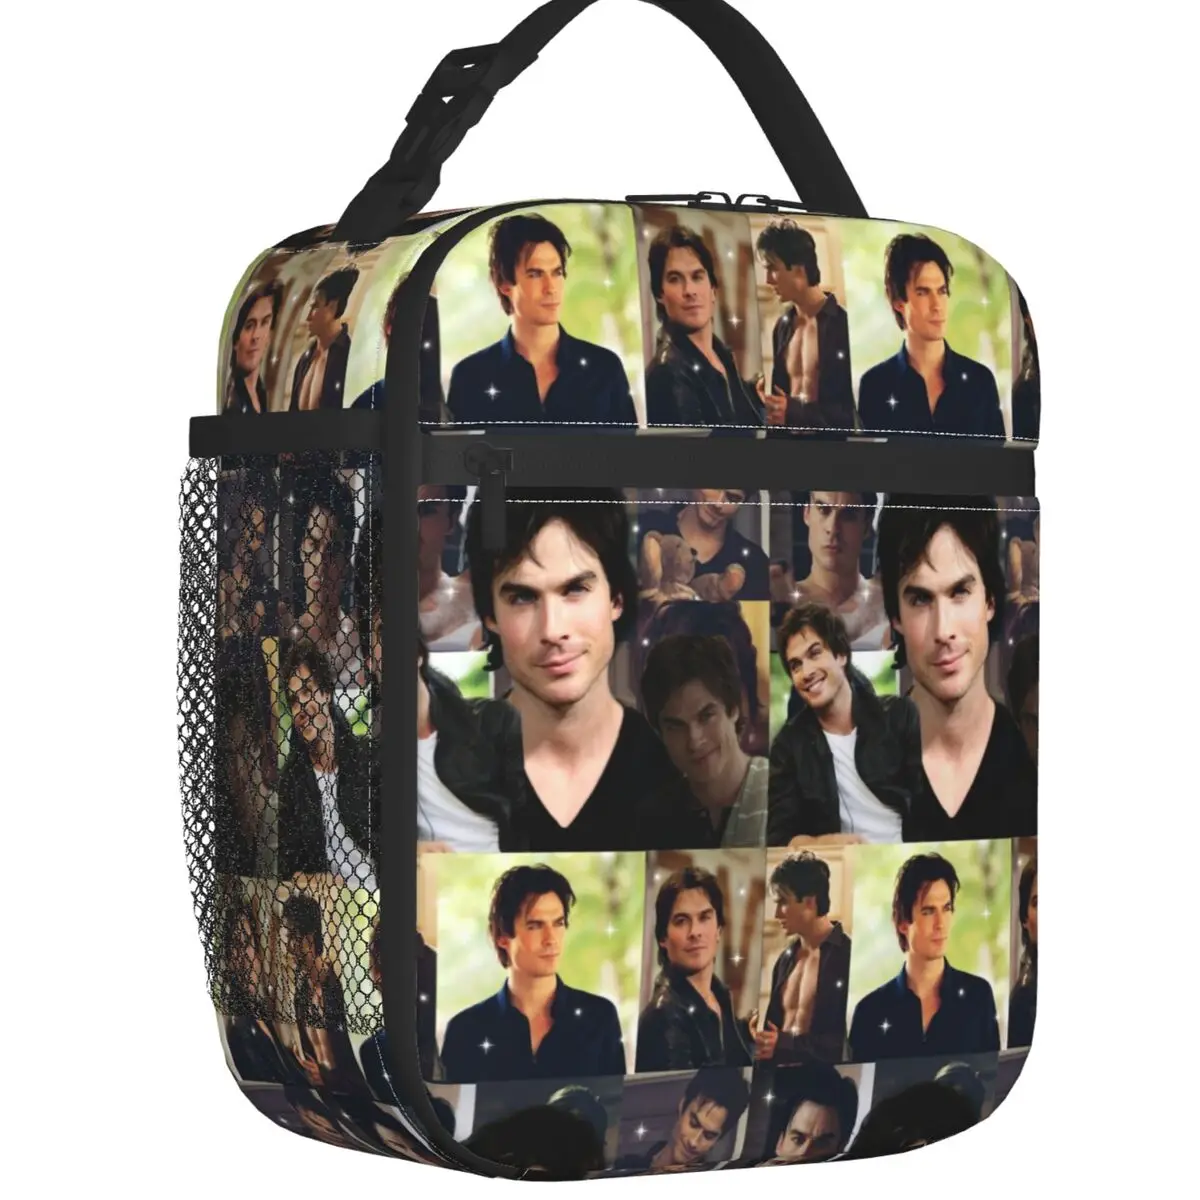 

Damon Salvatore The Vampire Diaries TV Show Insulated Lunch Bags Stefan Salvatore Collage Portable Thermal Cooler Food Lunch Box